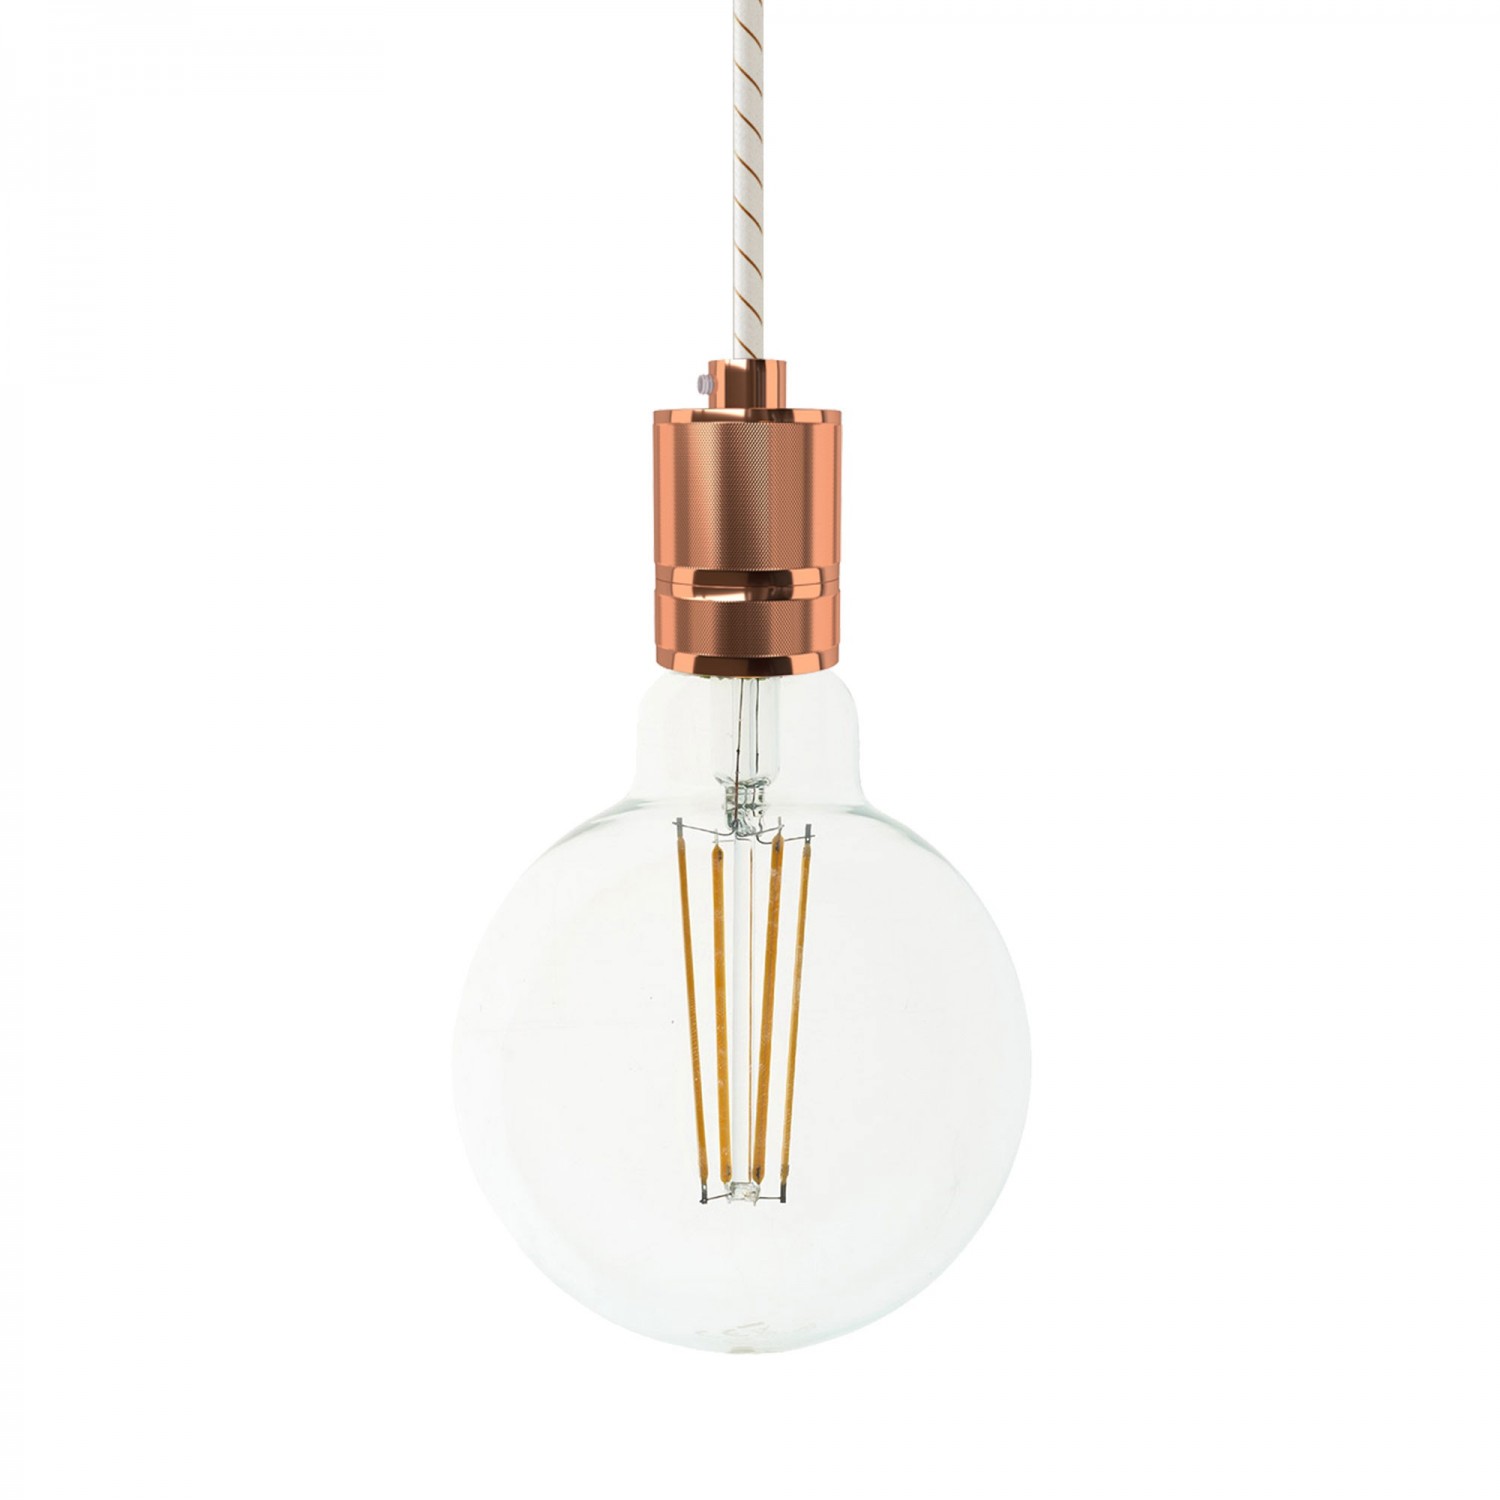 Pendant lamp with textile cable and milled aluminium lamp holder - Made in Italy